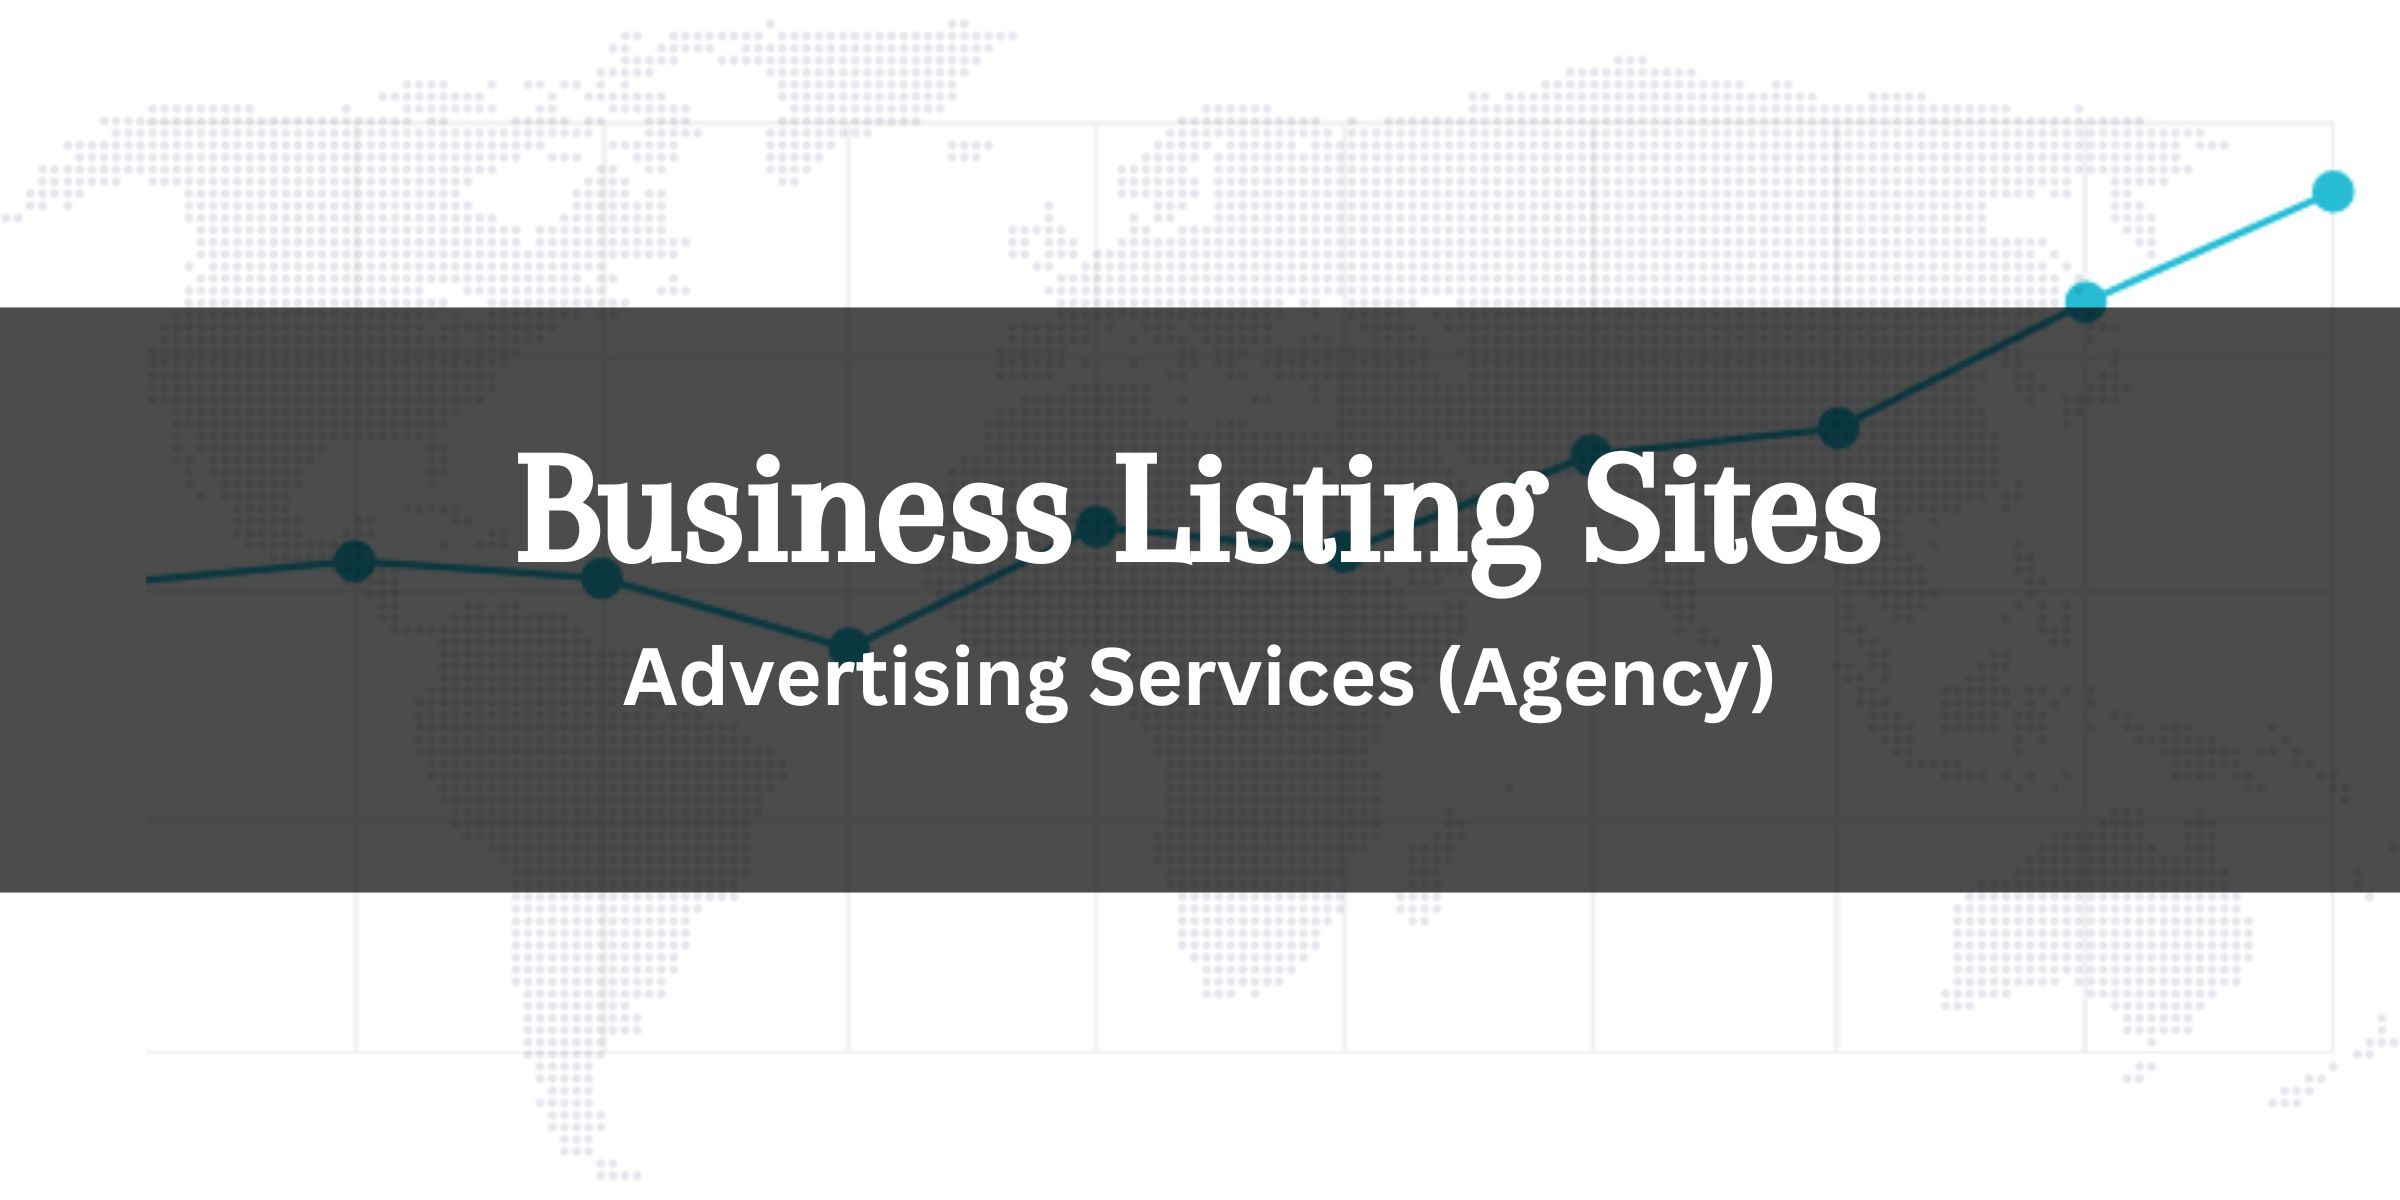 Free Business Listing Sites for Advertising Services